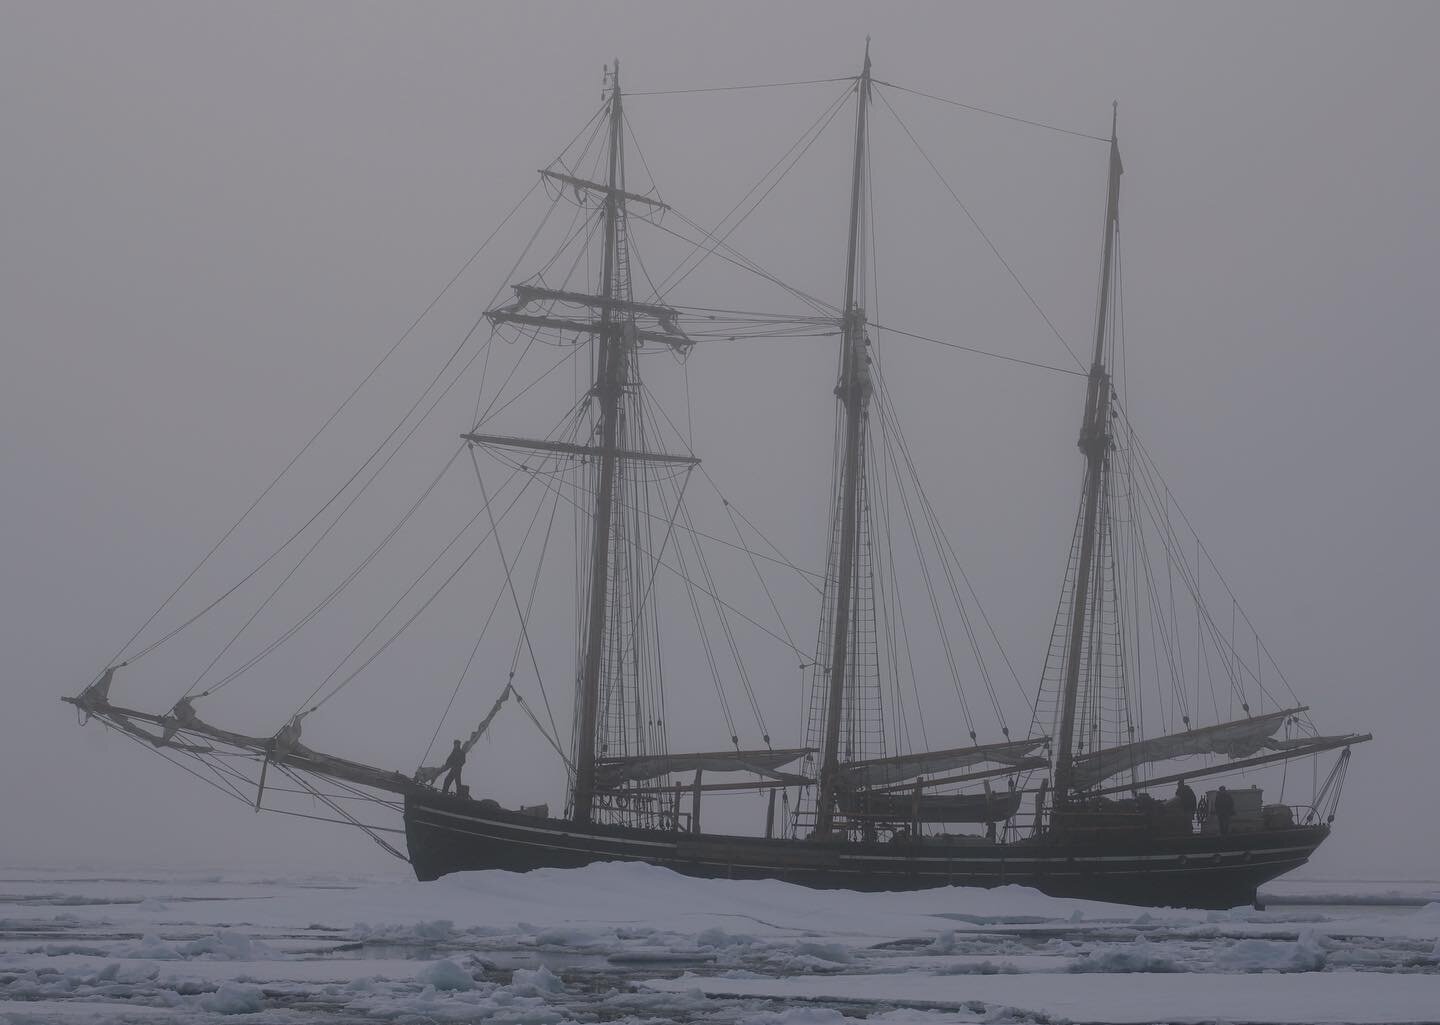 One singular purpose with regards to the filming was to be &ldquo;ice-locked&rdquo;, to be entrapped in the ice in the high arctic. Unlike the Endeavor of Ernest Shackleton&rsquo;s voyage, a little farther south. We embrace this situation with dedica